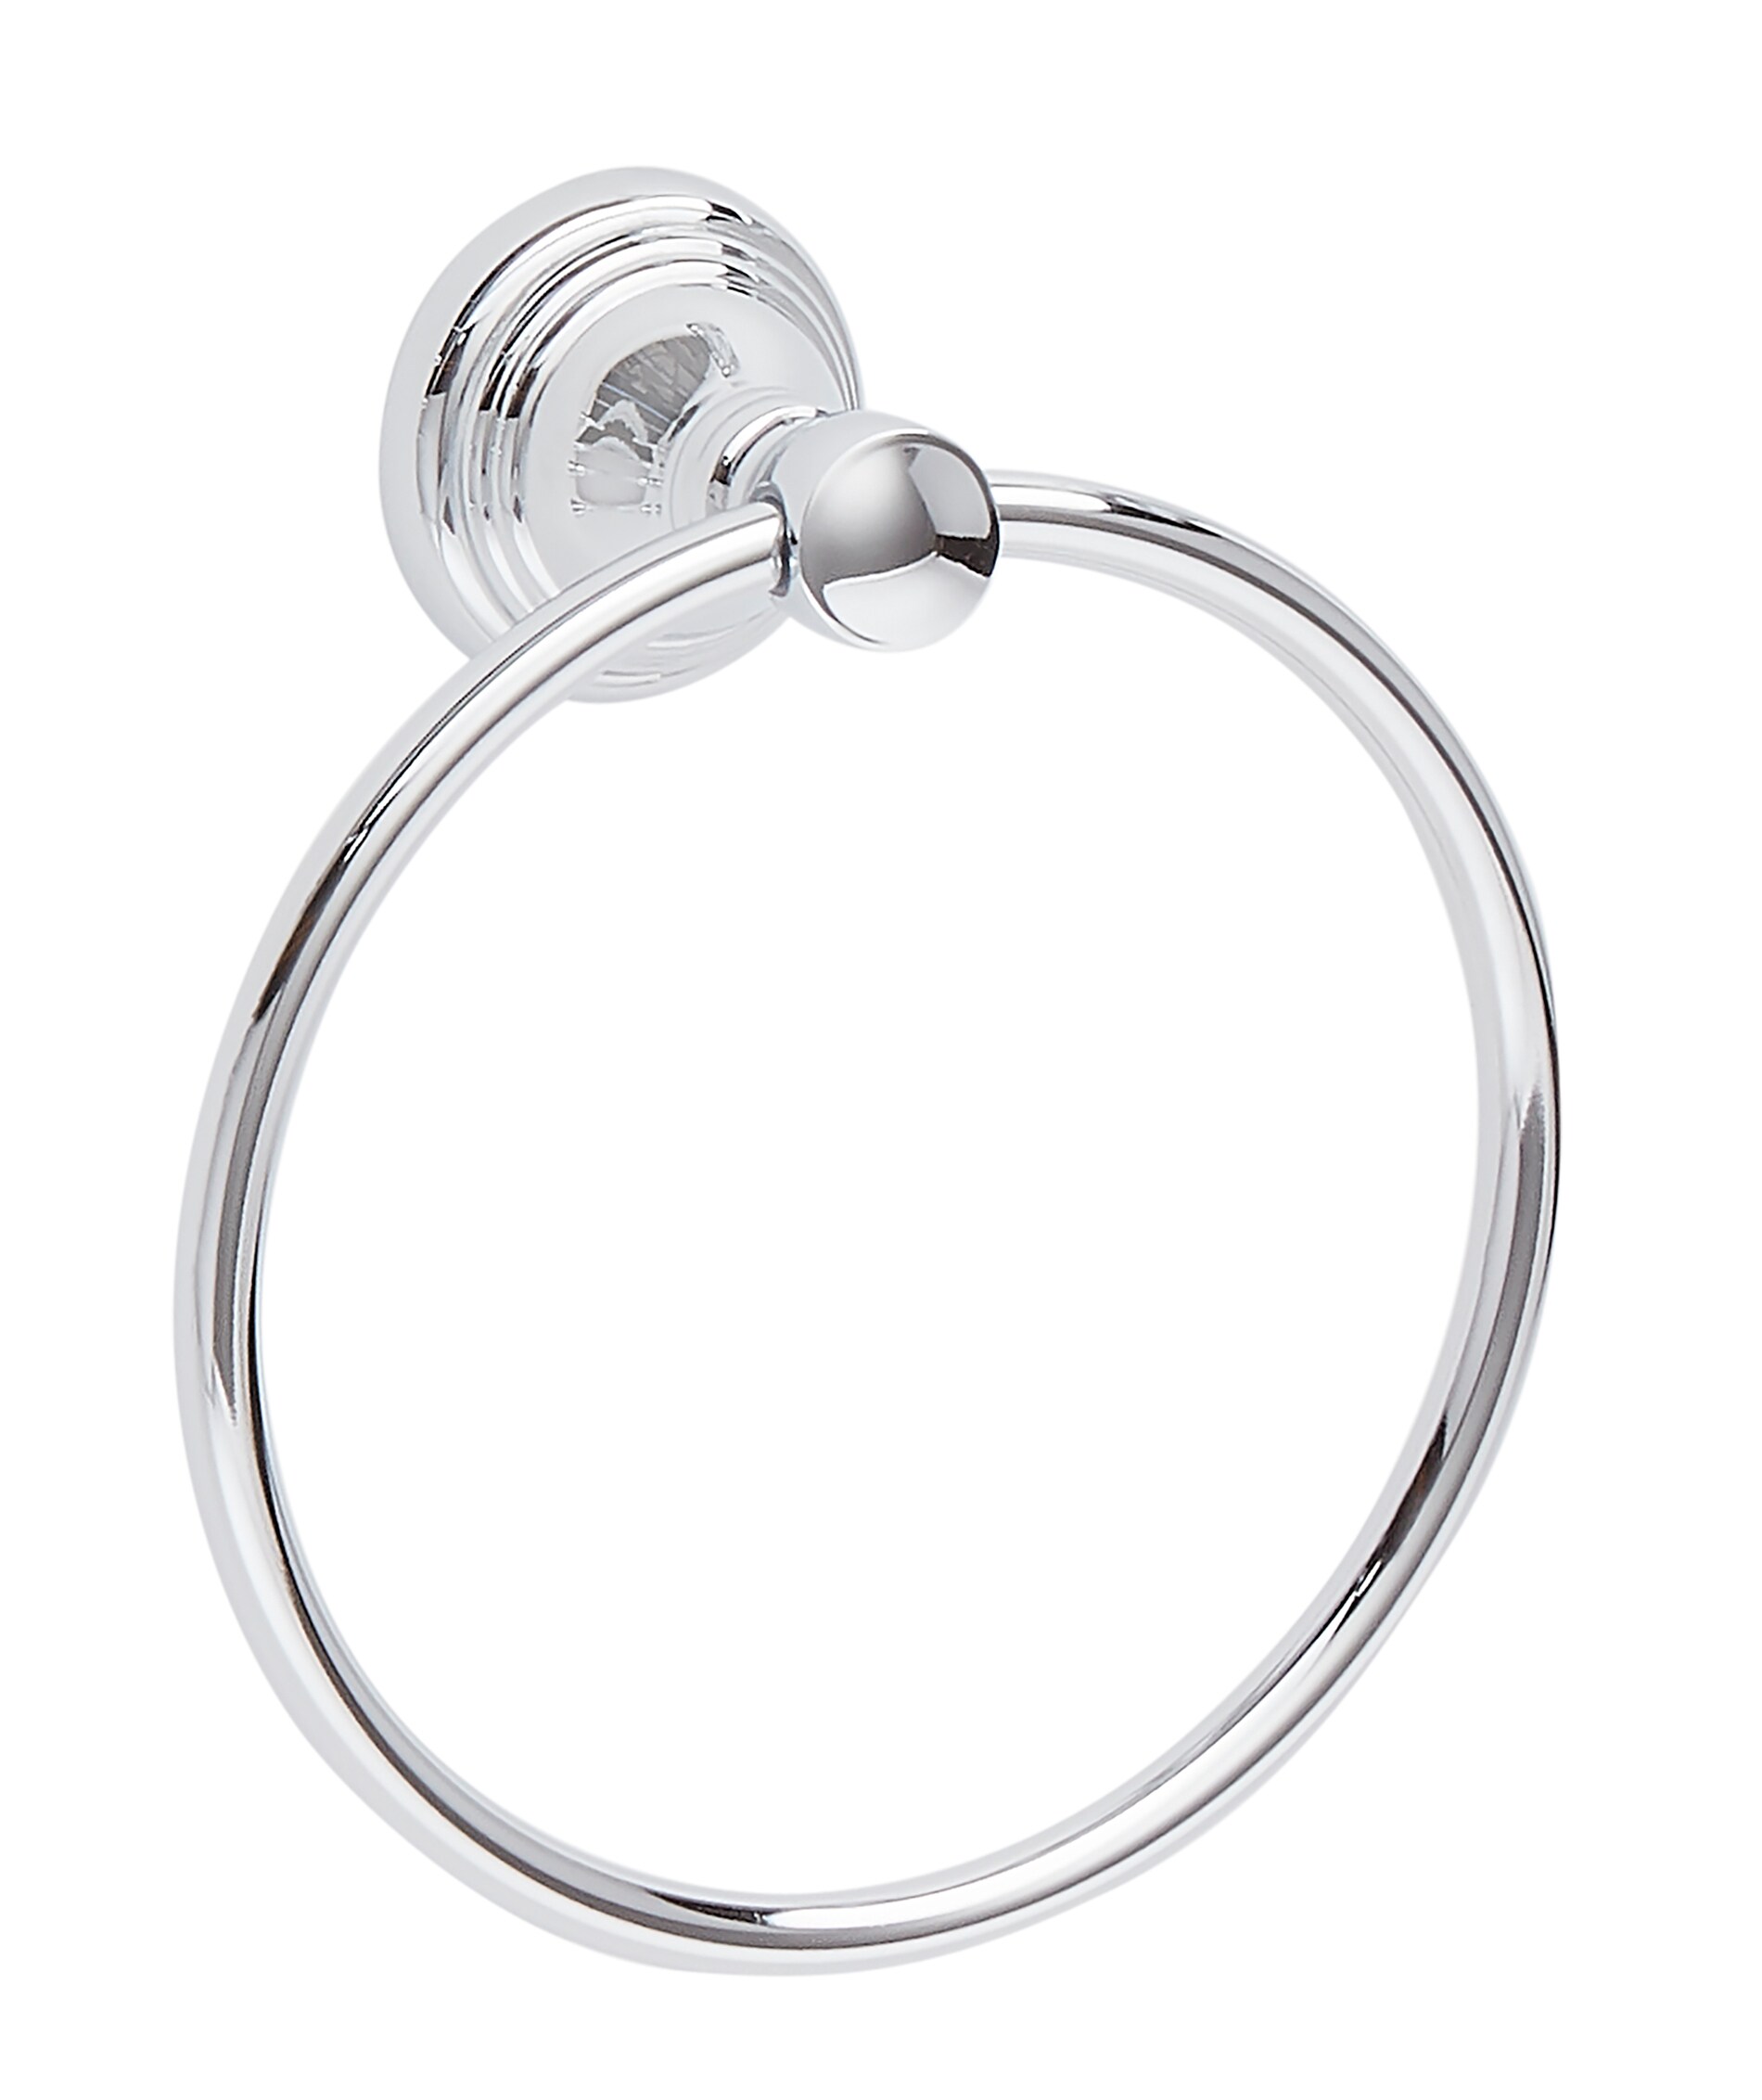 Wall Mounted Chrome Towel Ring Holder Bathroom Accessory Kitchen Cloth Fixings 